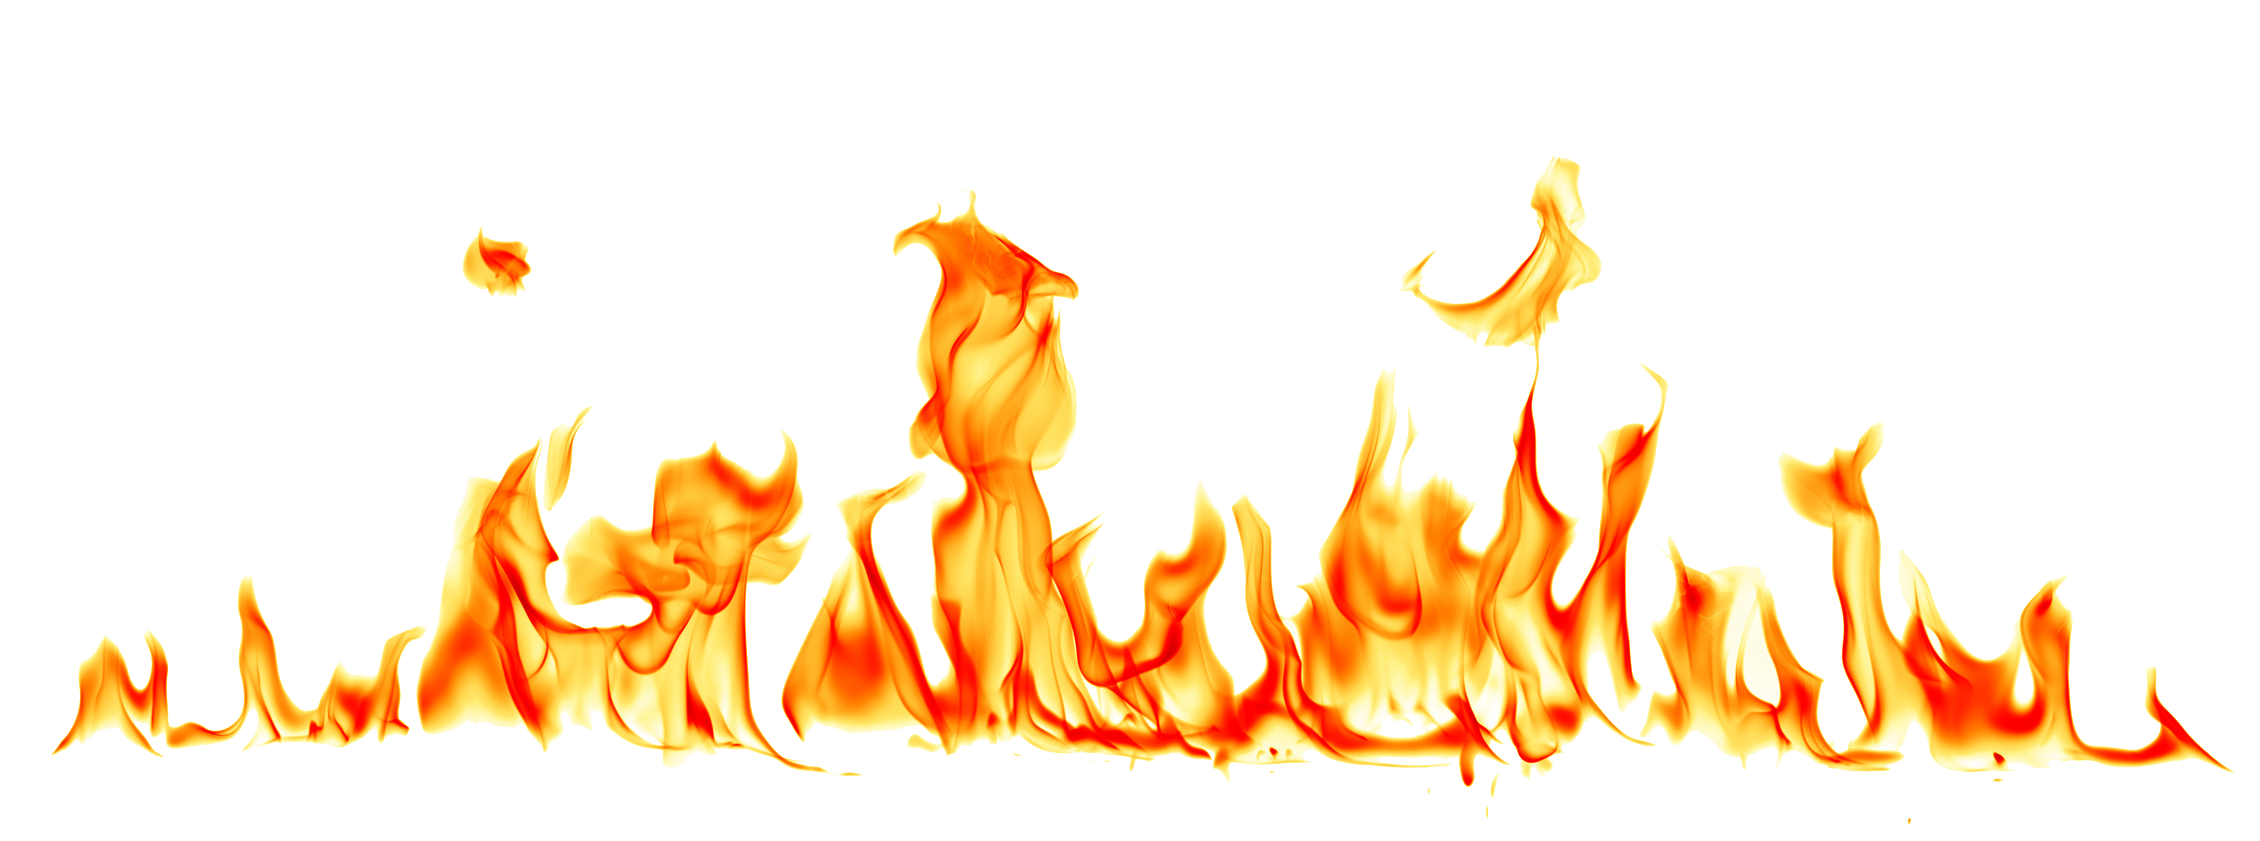 fire clipart png - photo #29